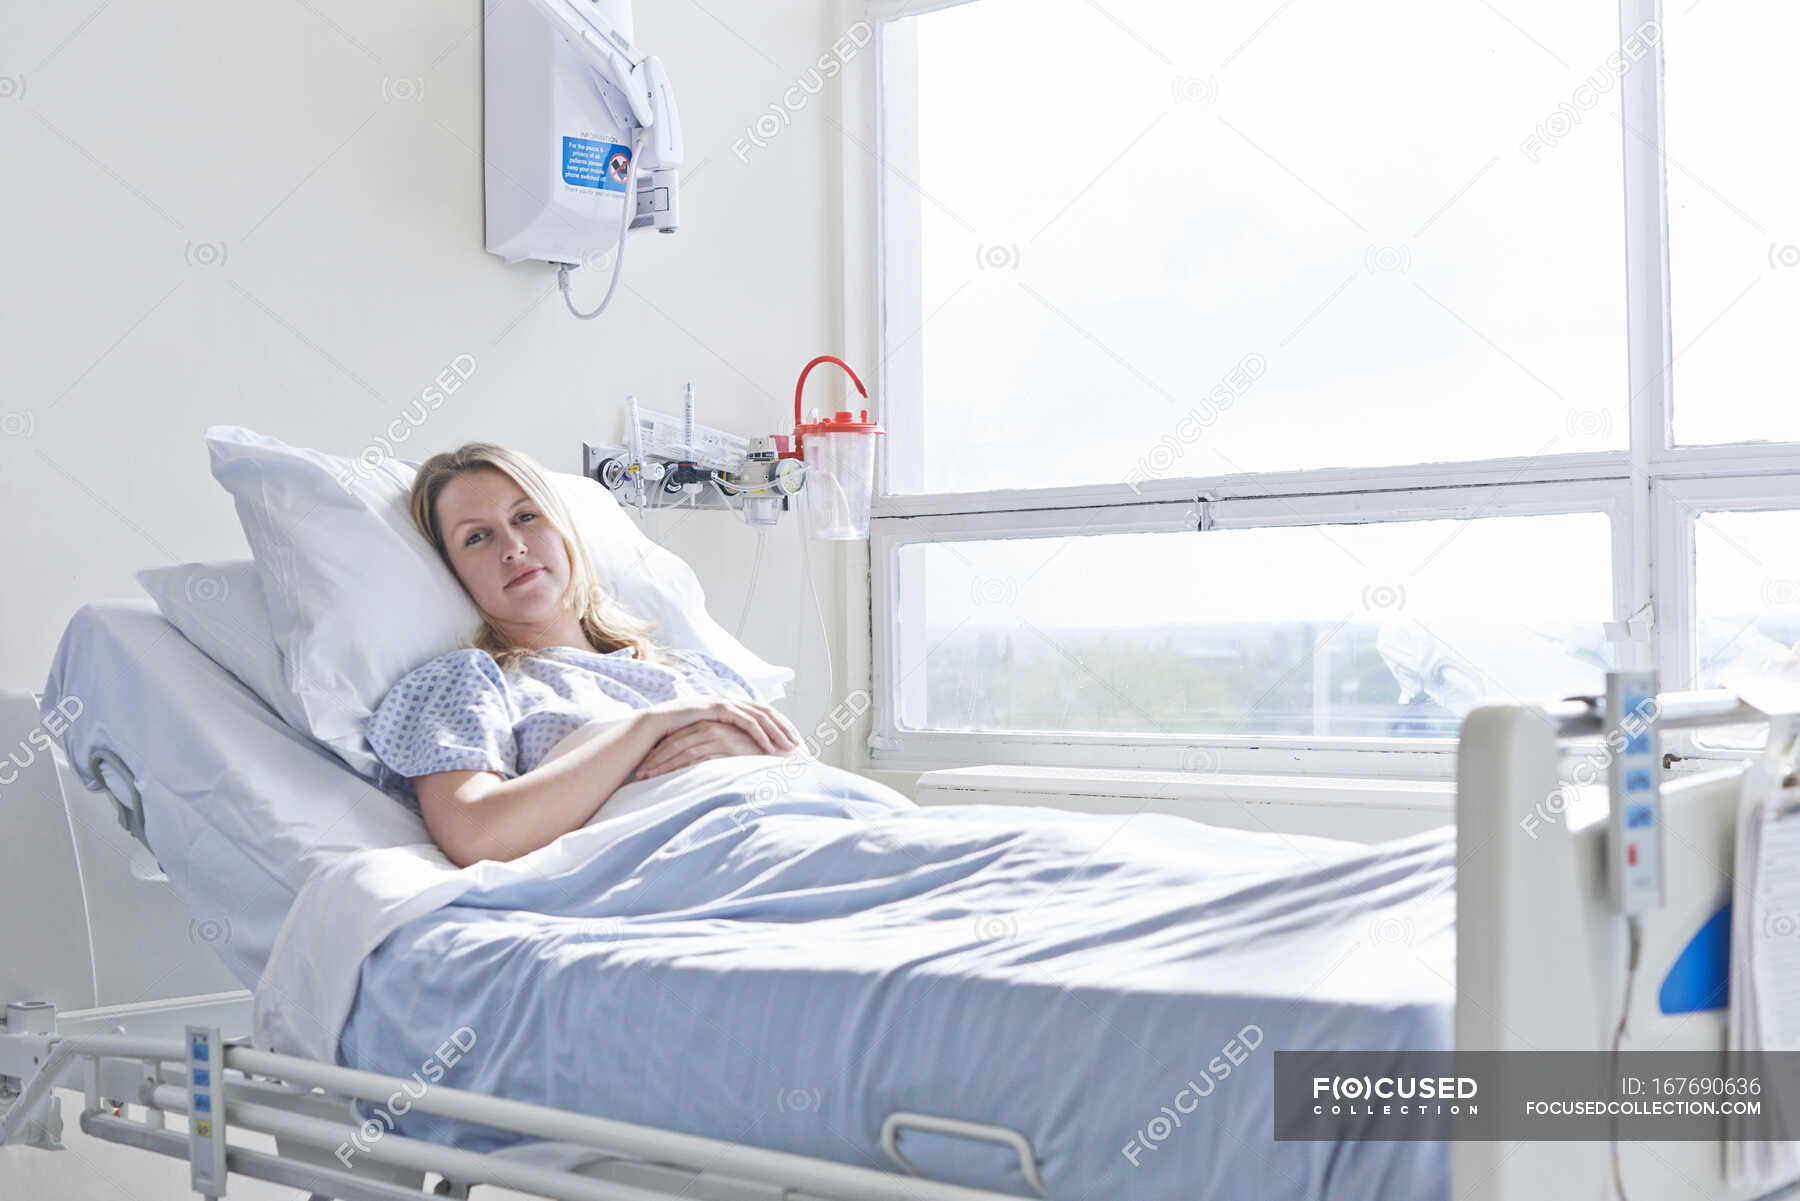 Patient lying in hospital bed — woman, science collection - Stock